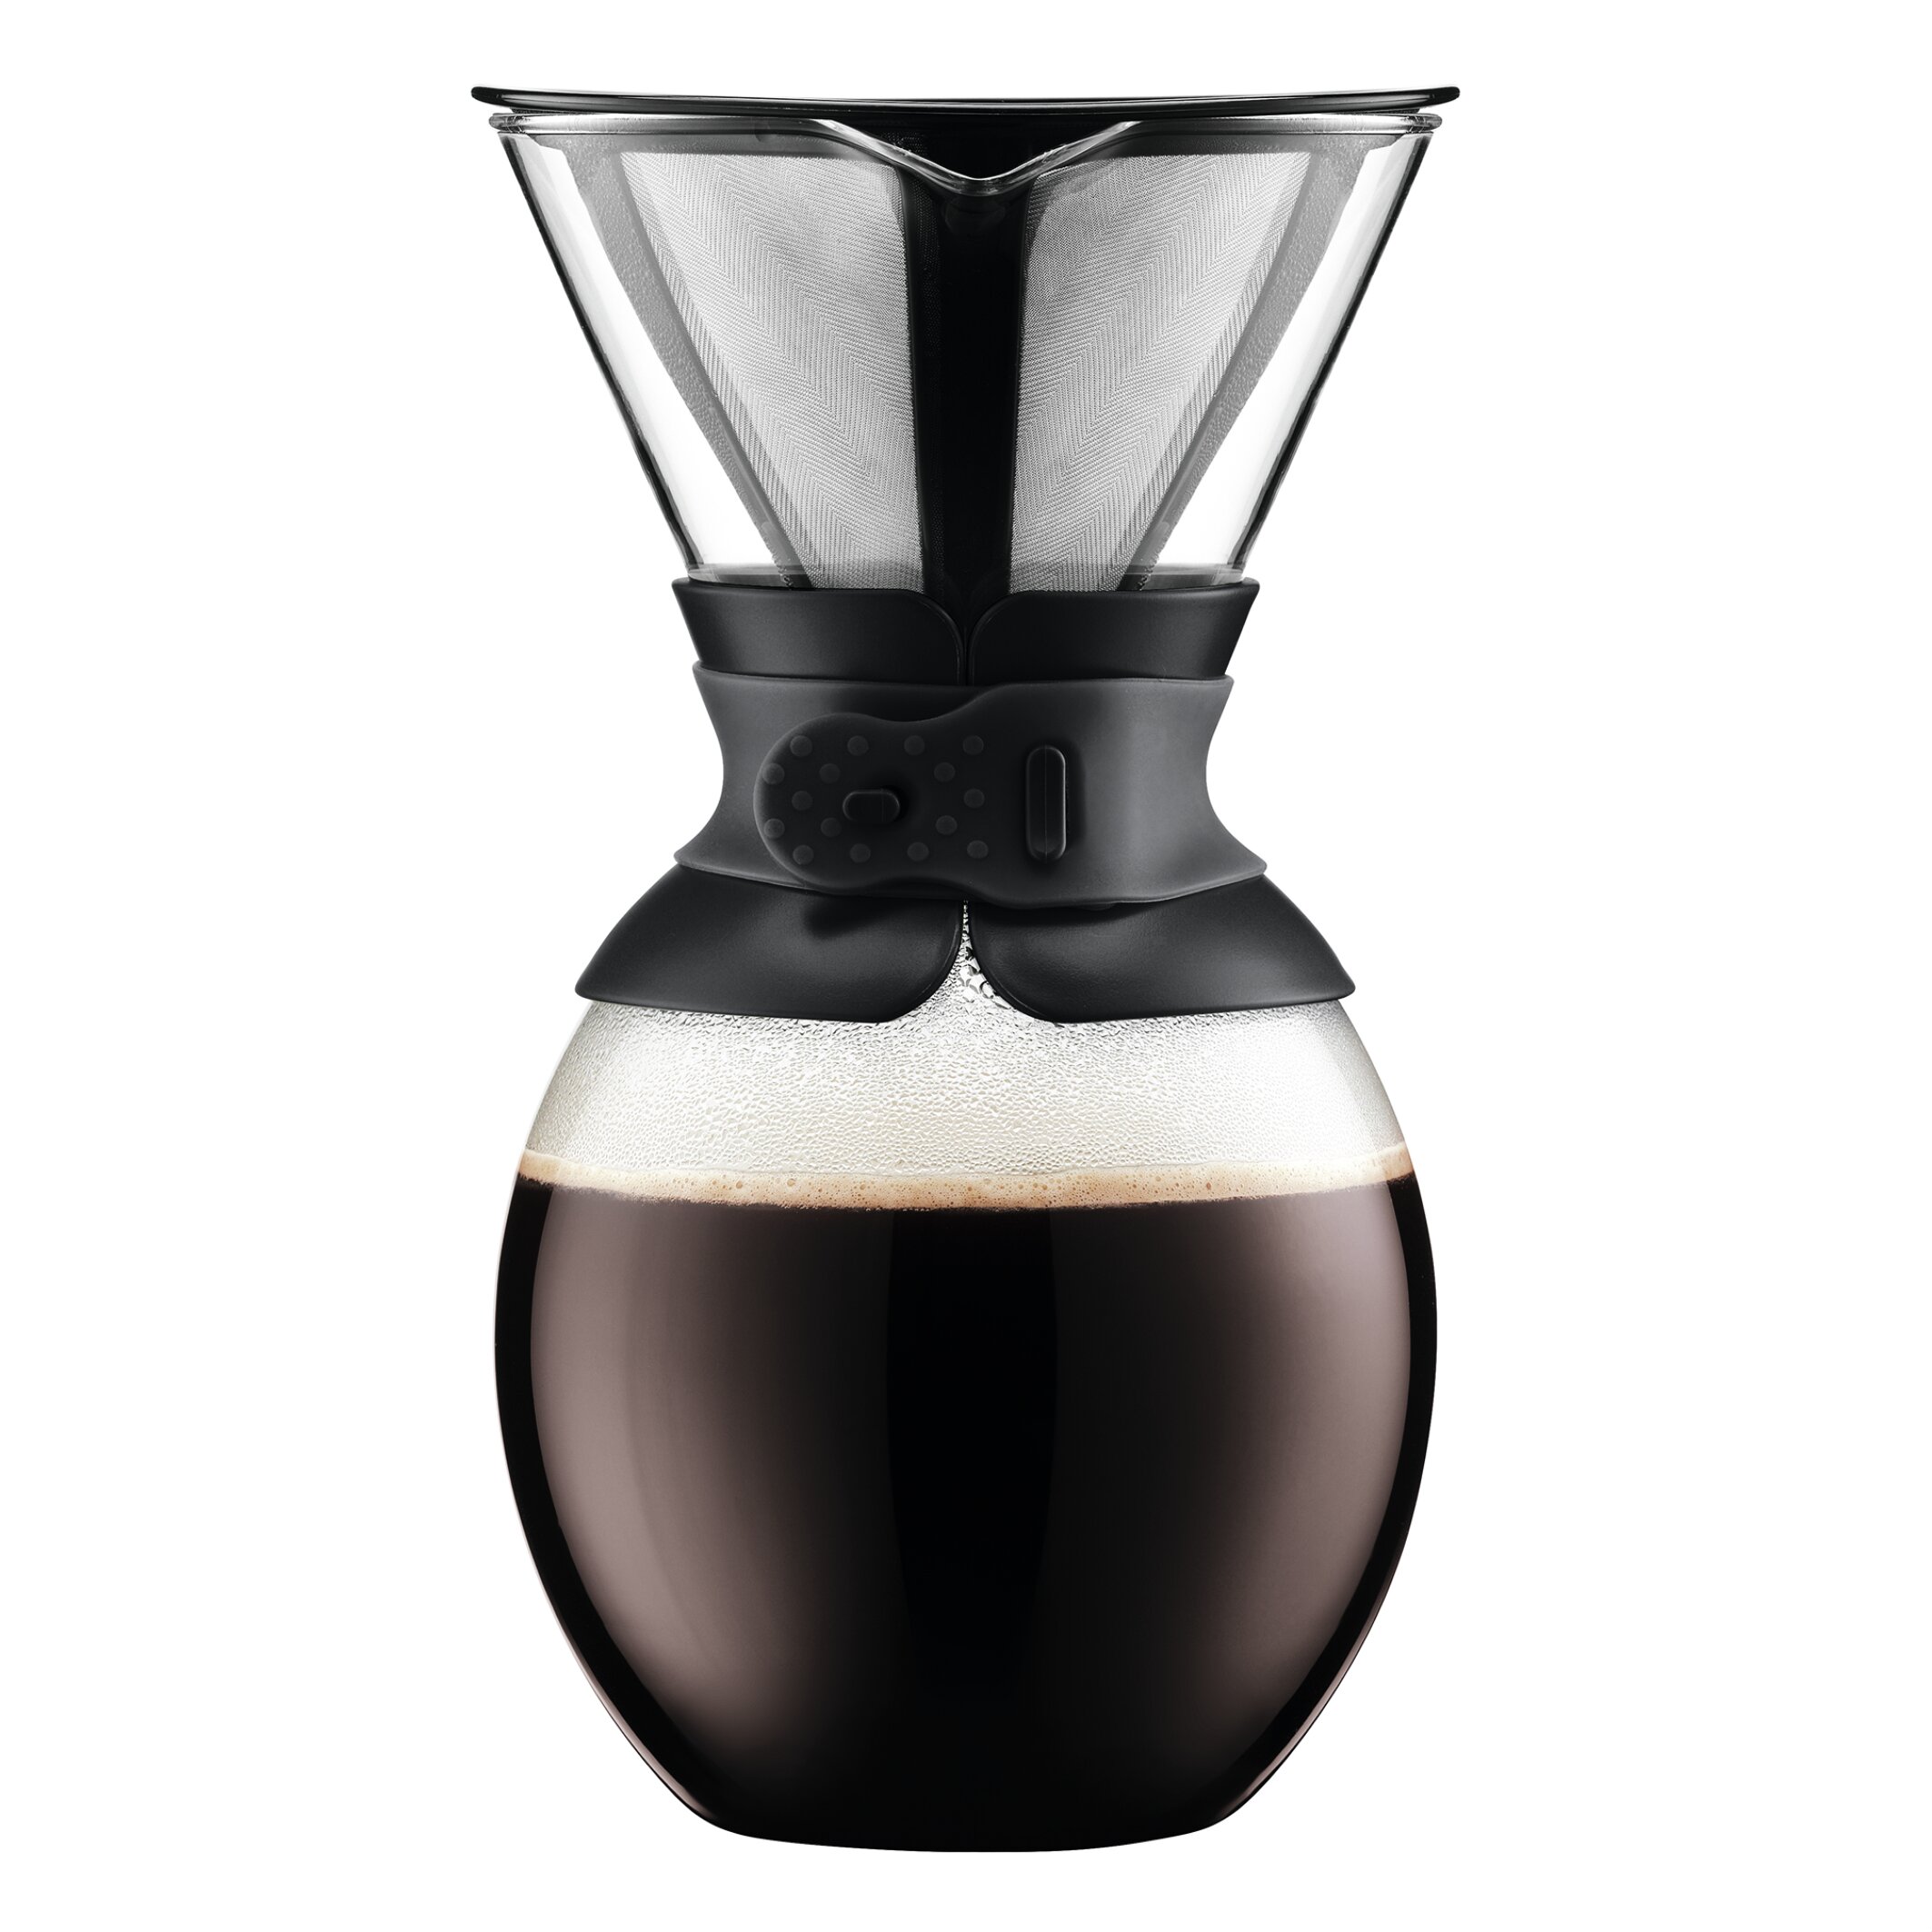 Bodum Pour Over Coffee Maker 8 Cup, Double Wall Cork